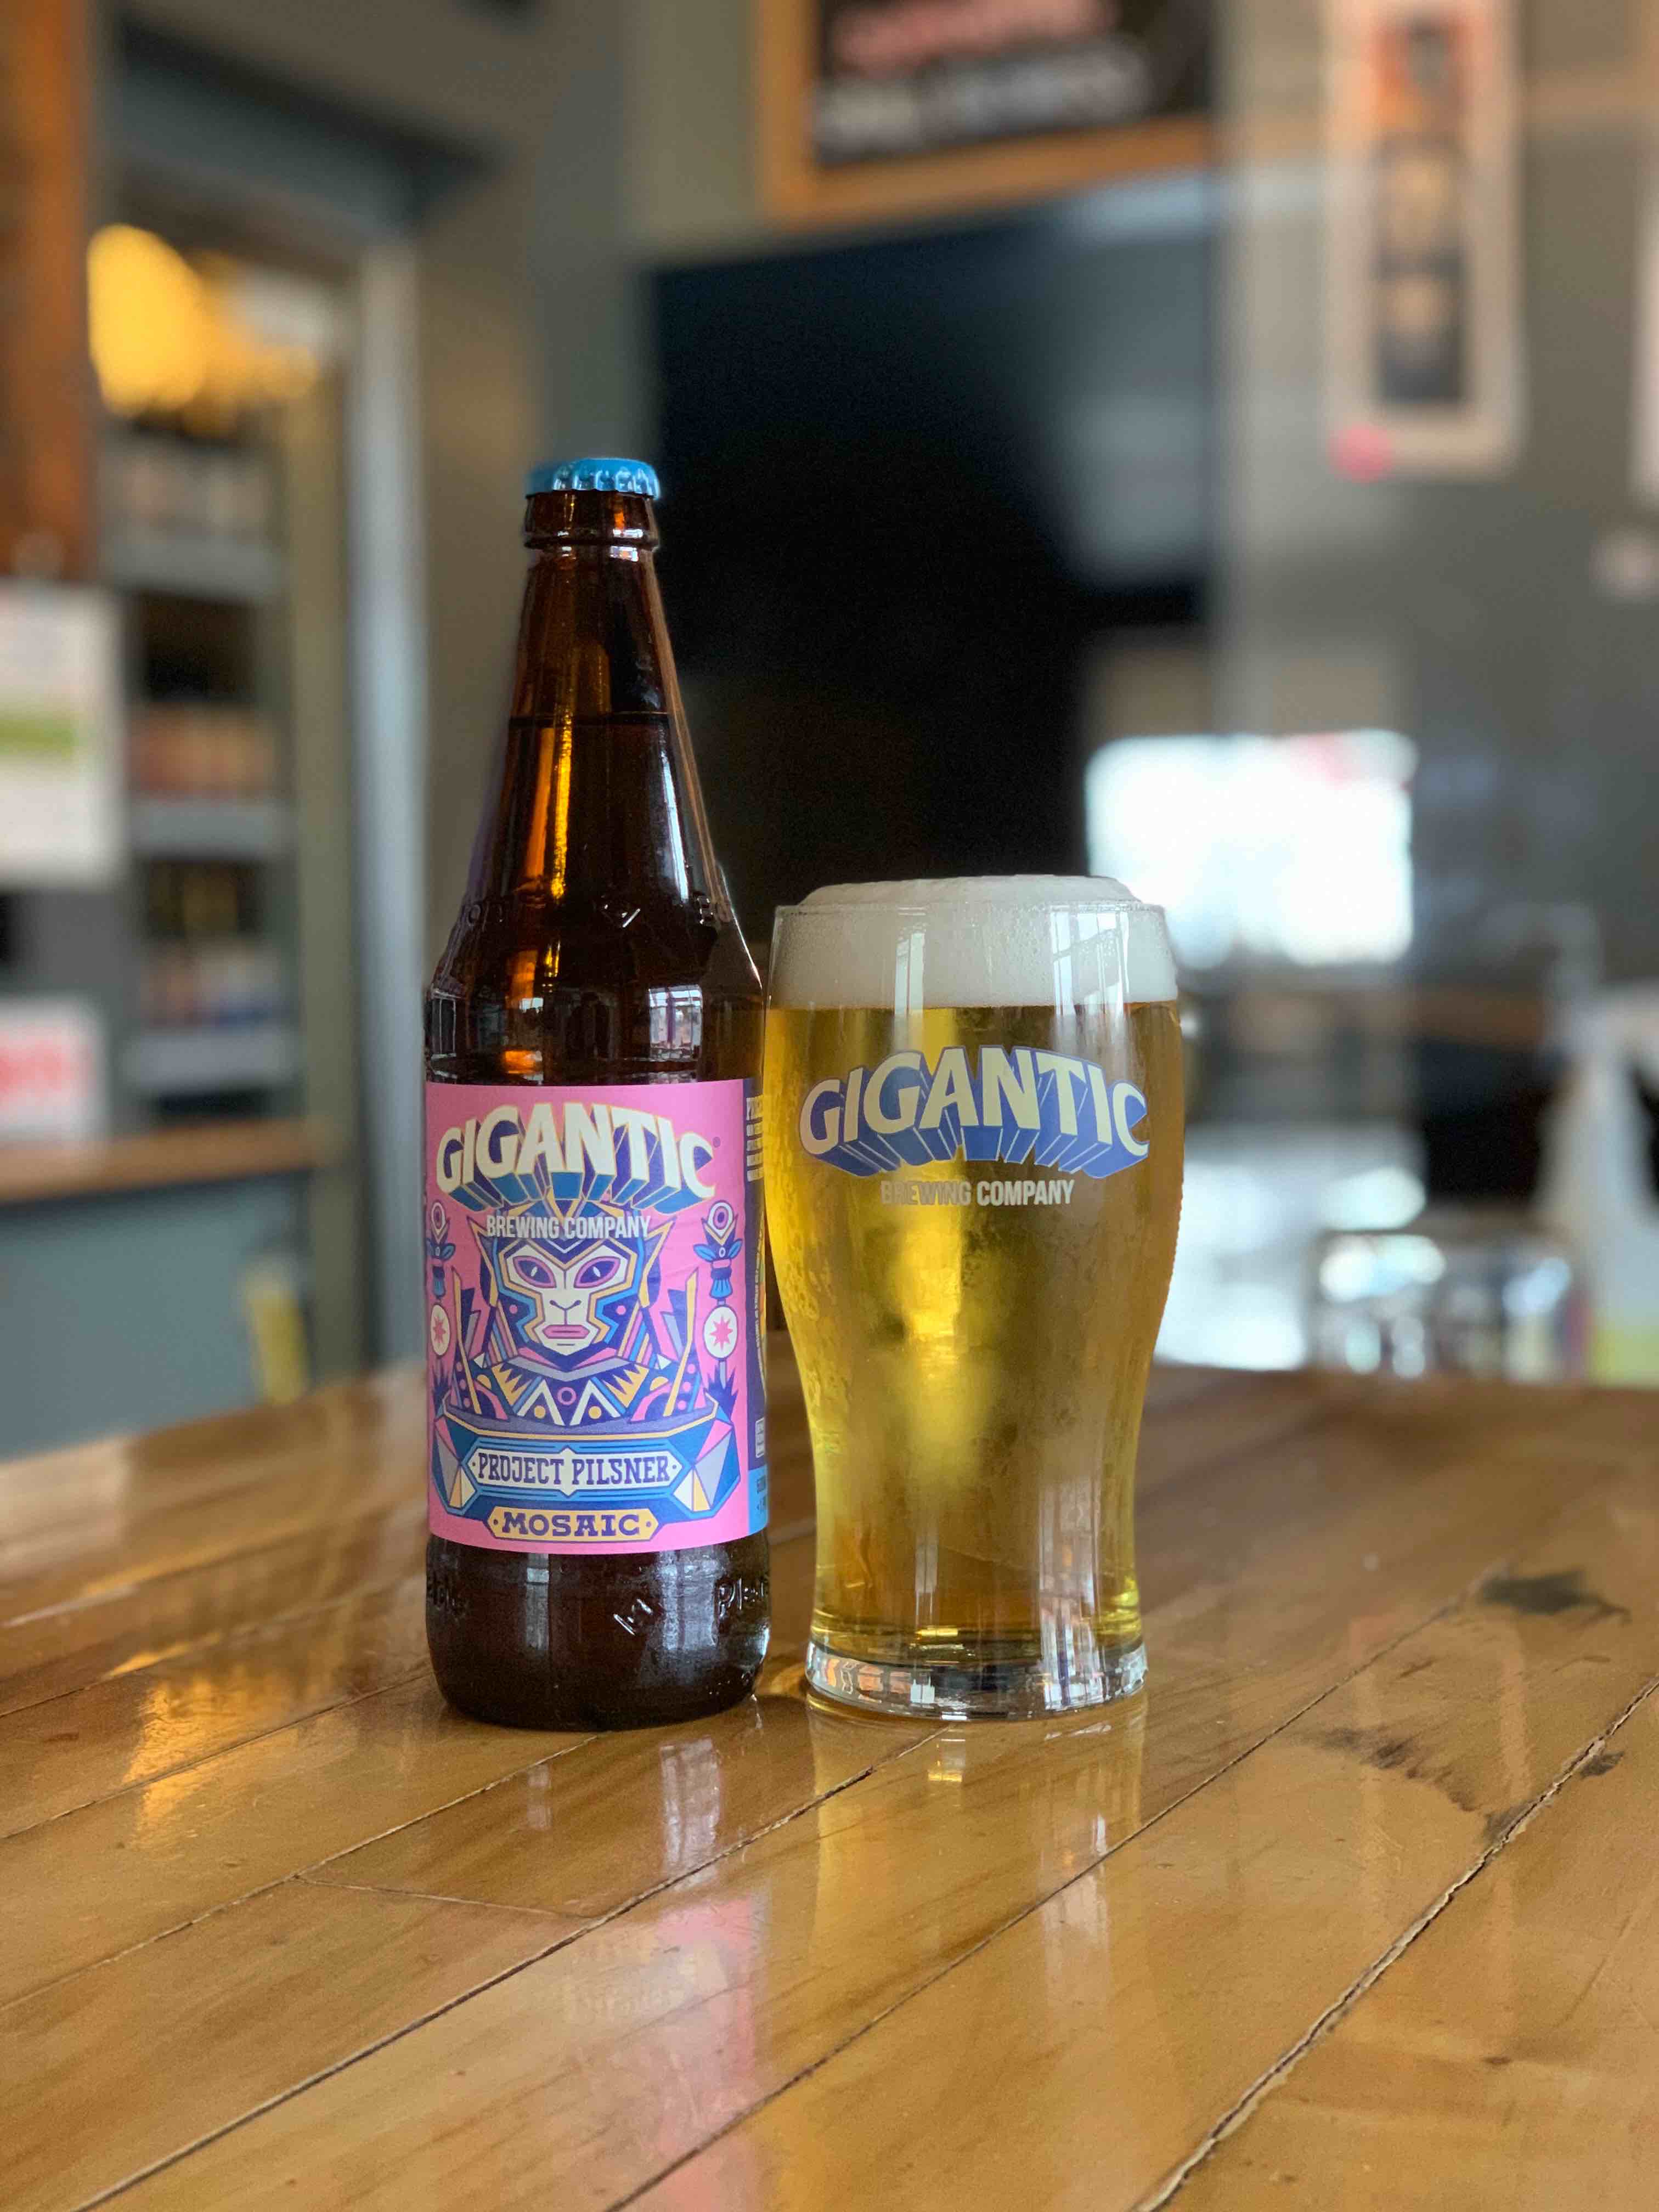 image of Project Pilsner Mosaic courtesy of Gigantic Brewing